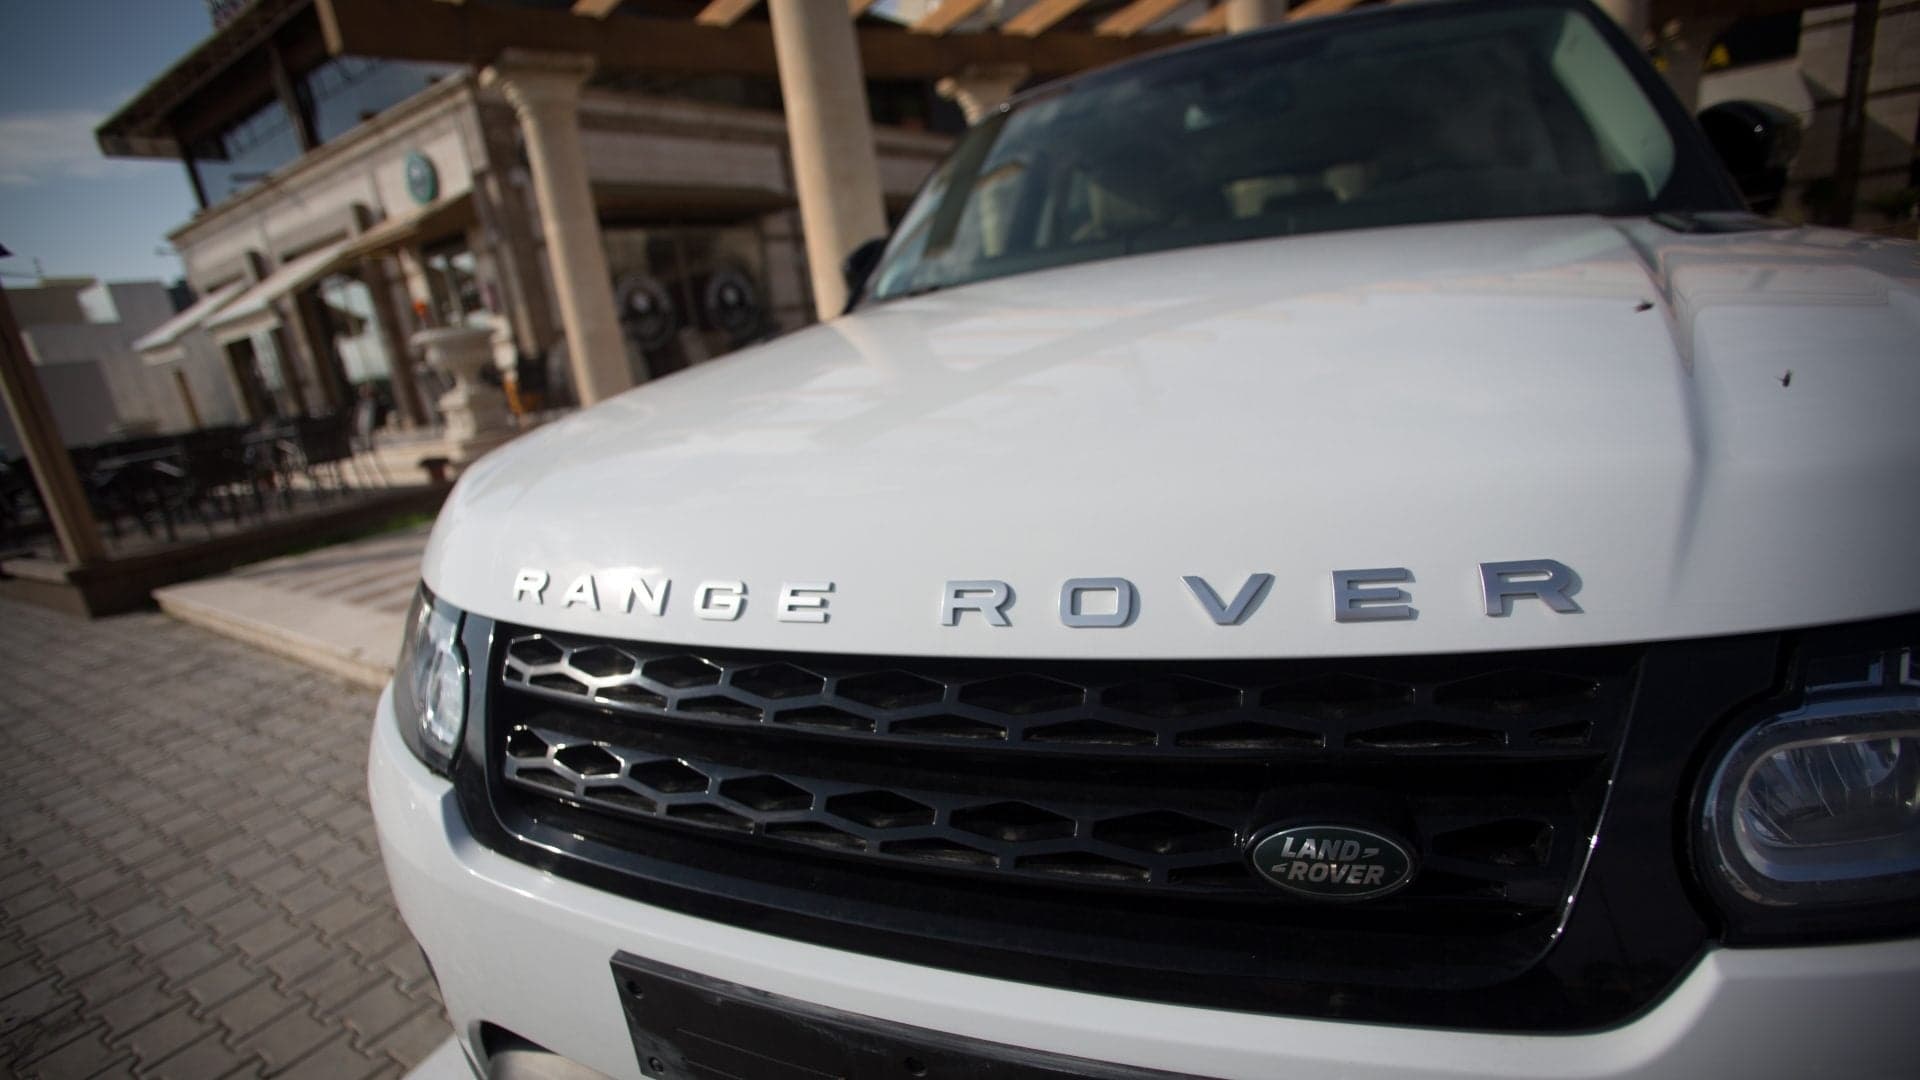 Range Rover Driver Hit With DUI After Driving Up Magic Mountain Ski Slope